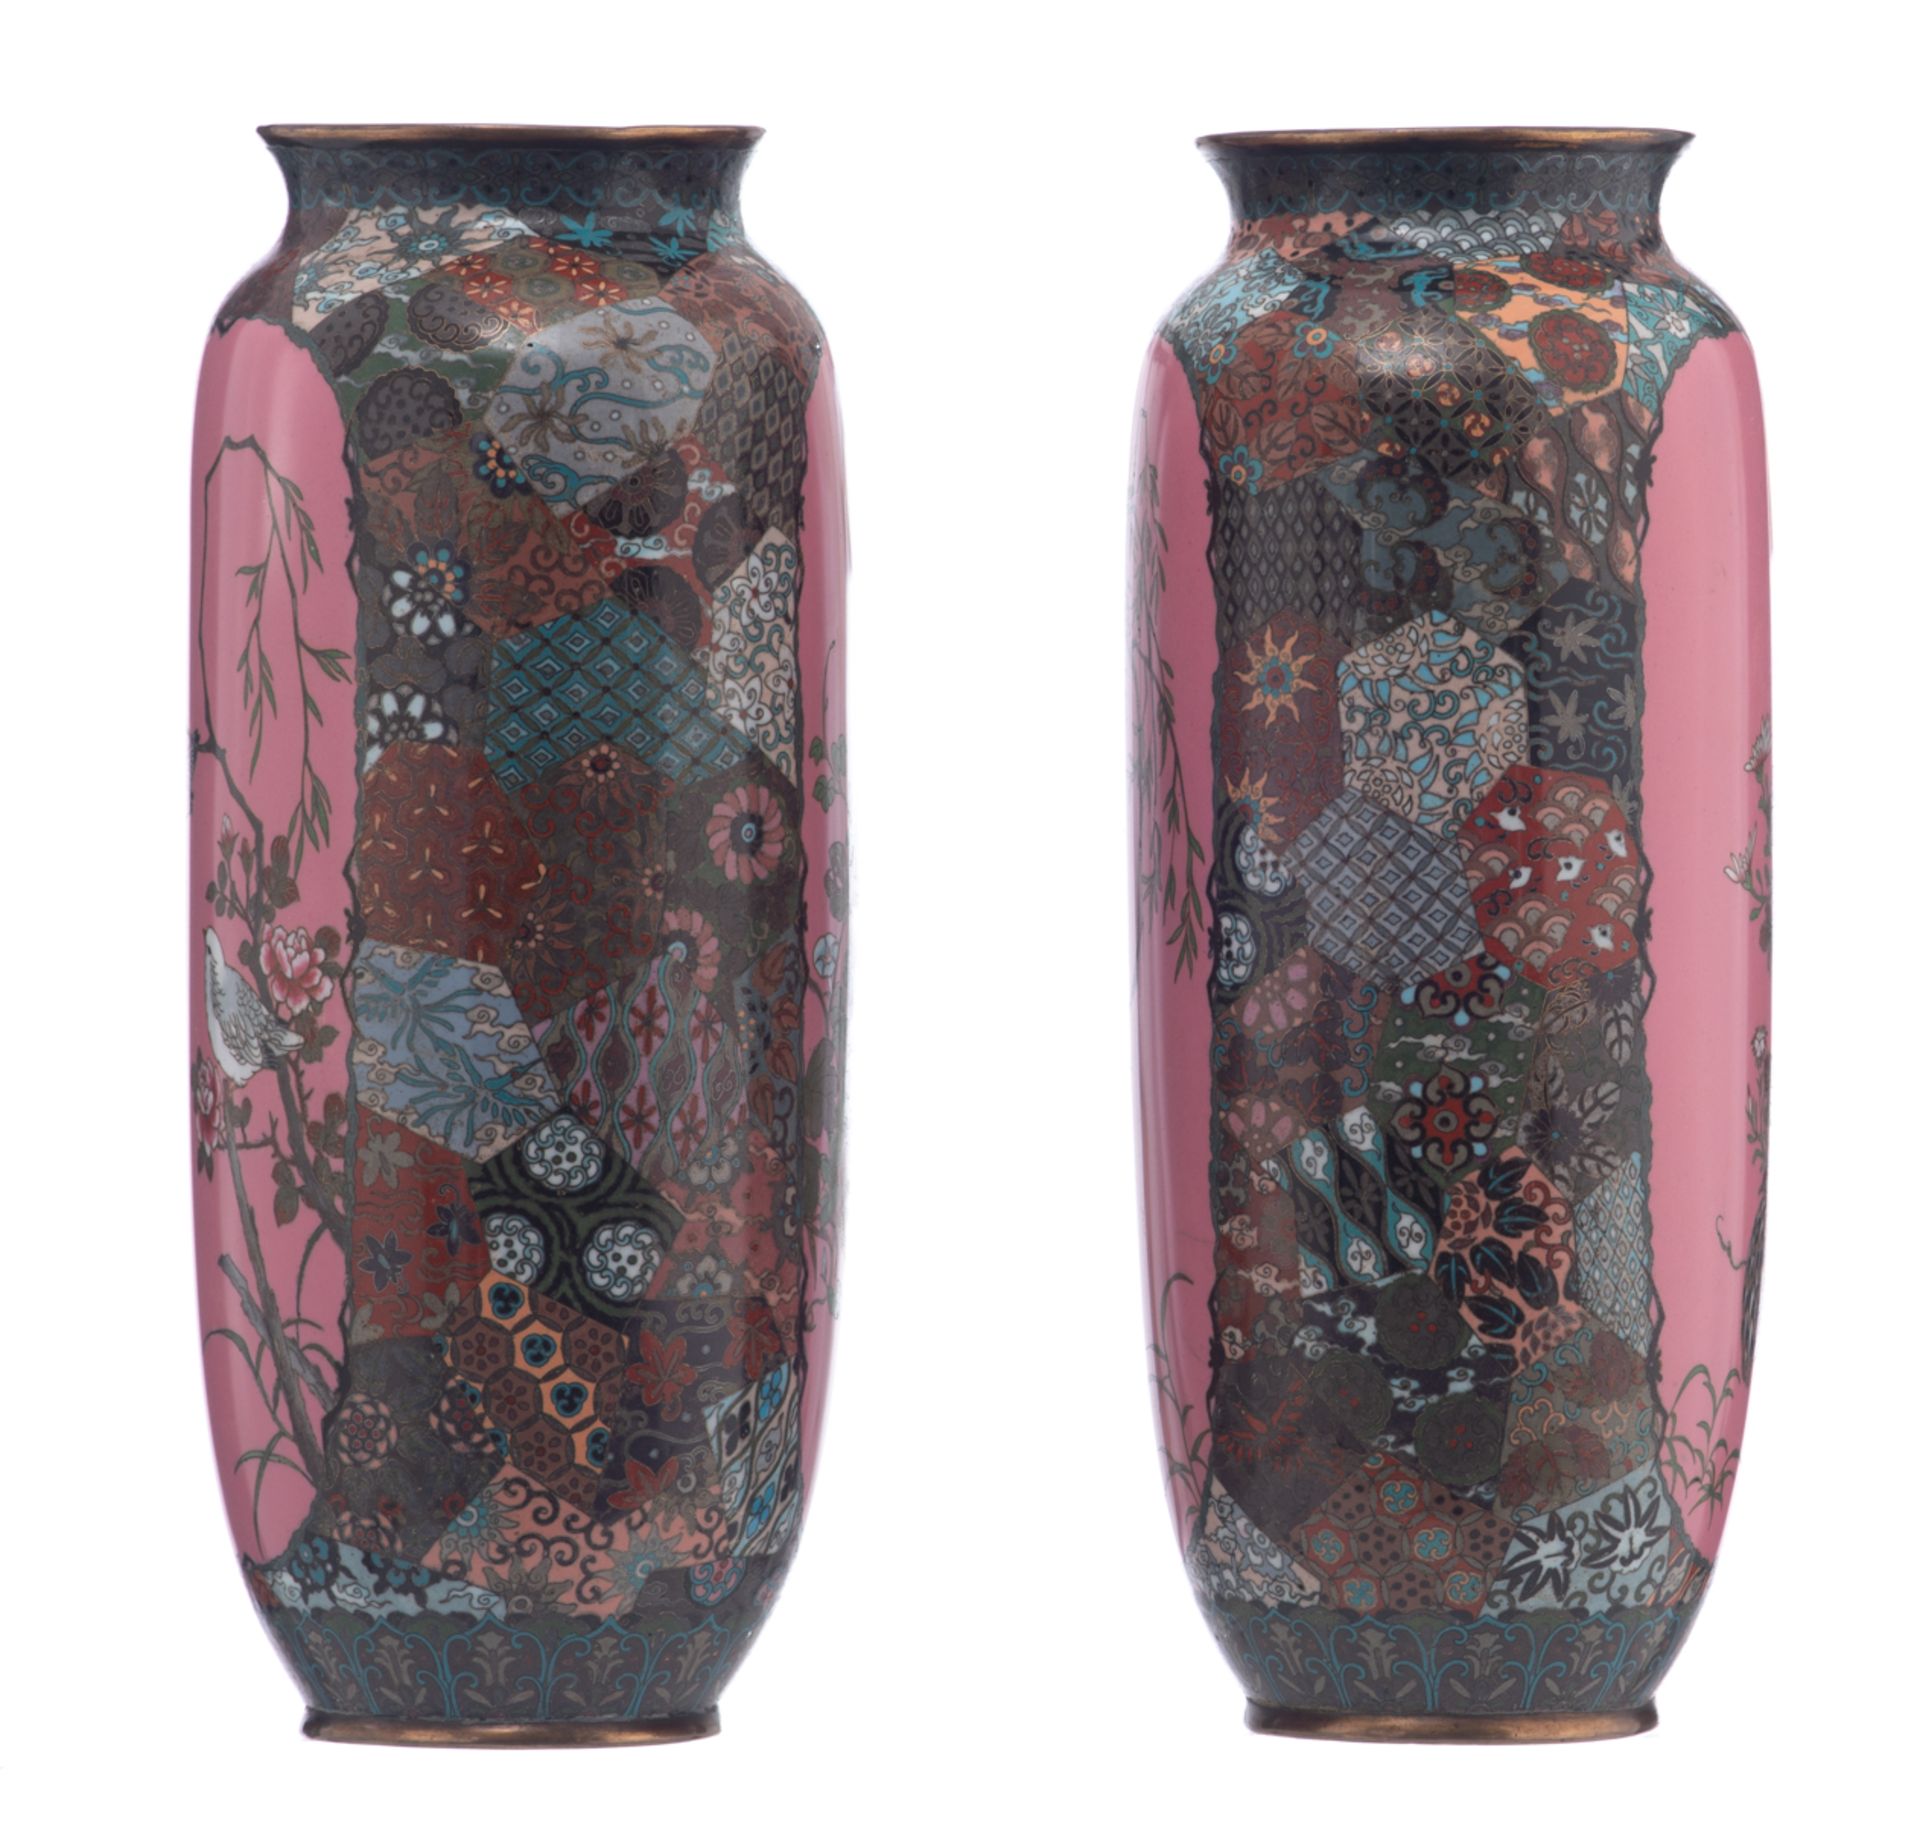 Two Japanese cloisonné enamel vases, floral decorated with geometric motives, the panels pink ground - Image 4 of 7